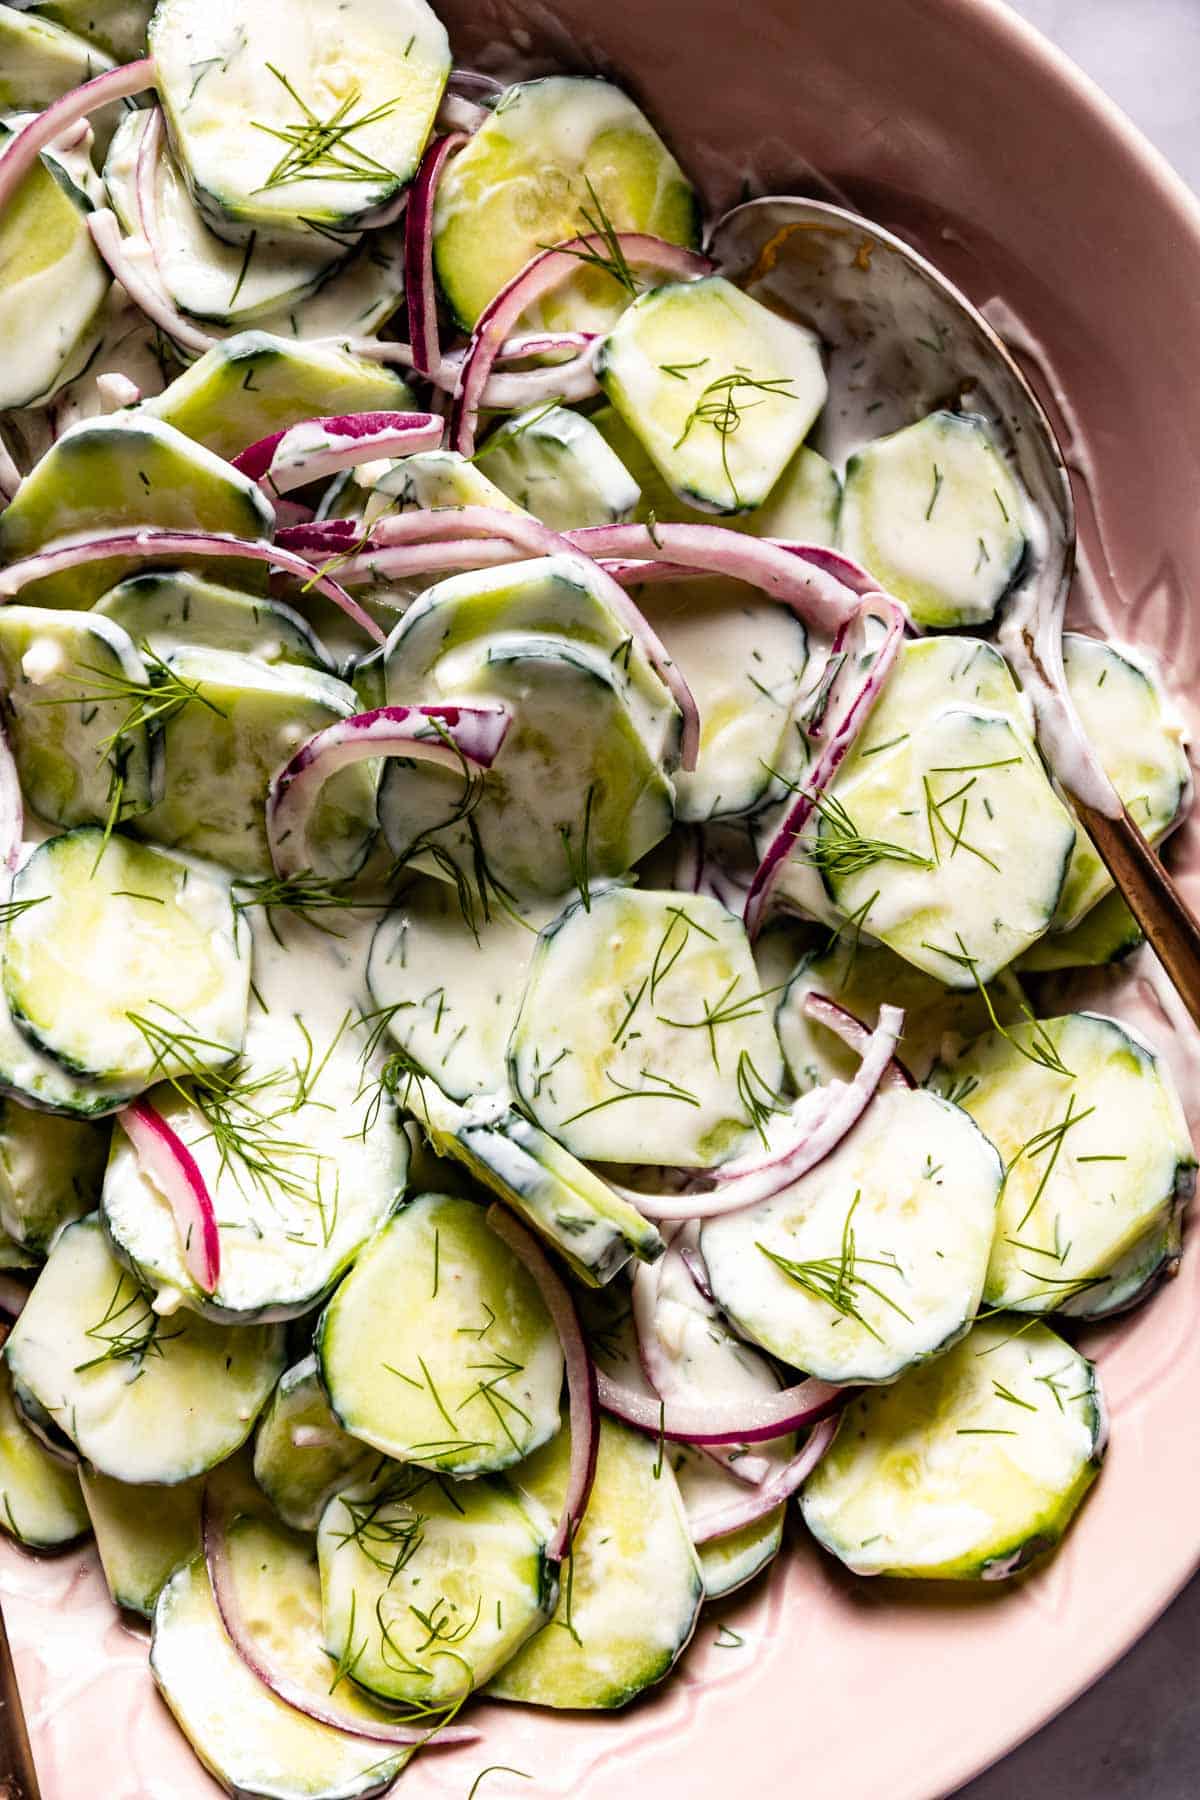 Greek cucumber salad recipe with greek yogurt dressing in a bowl from the top view.